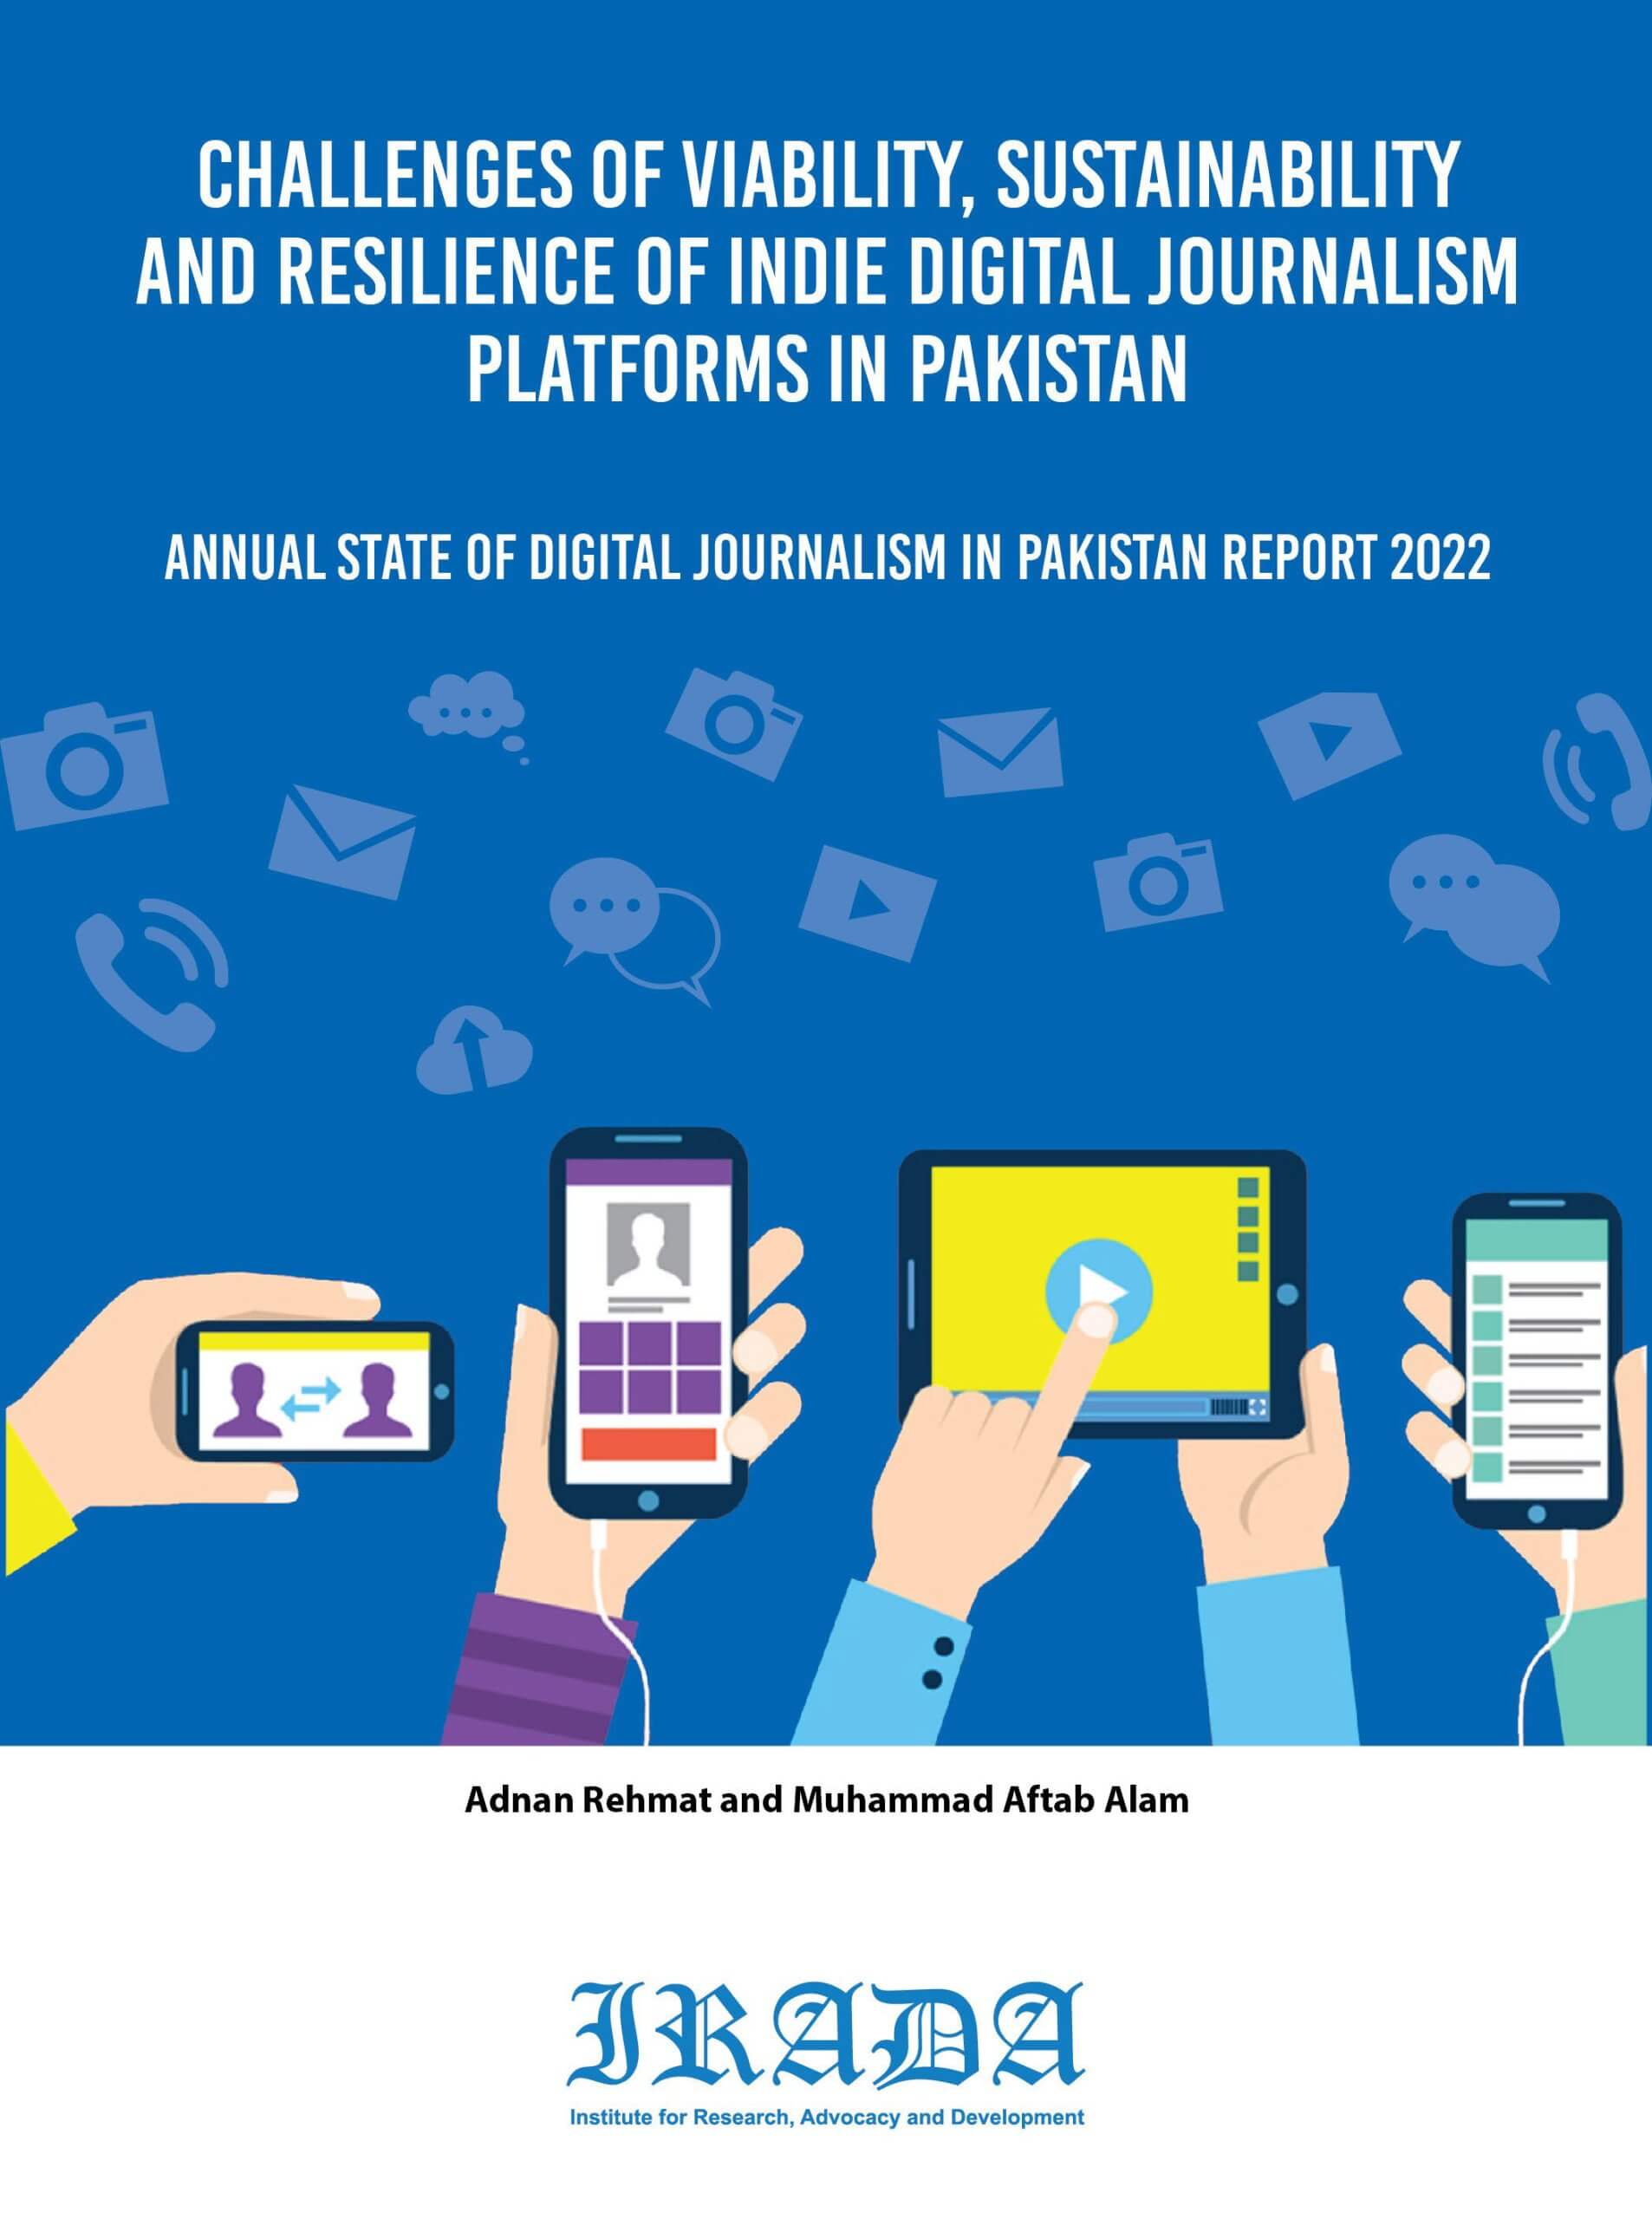 Challenges of Viability, Sustainability and Resilience of Indie Digital Journalism Platforms in Pakistan